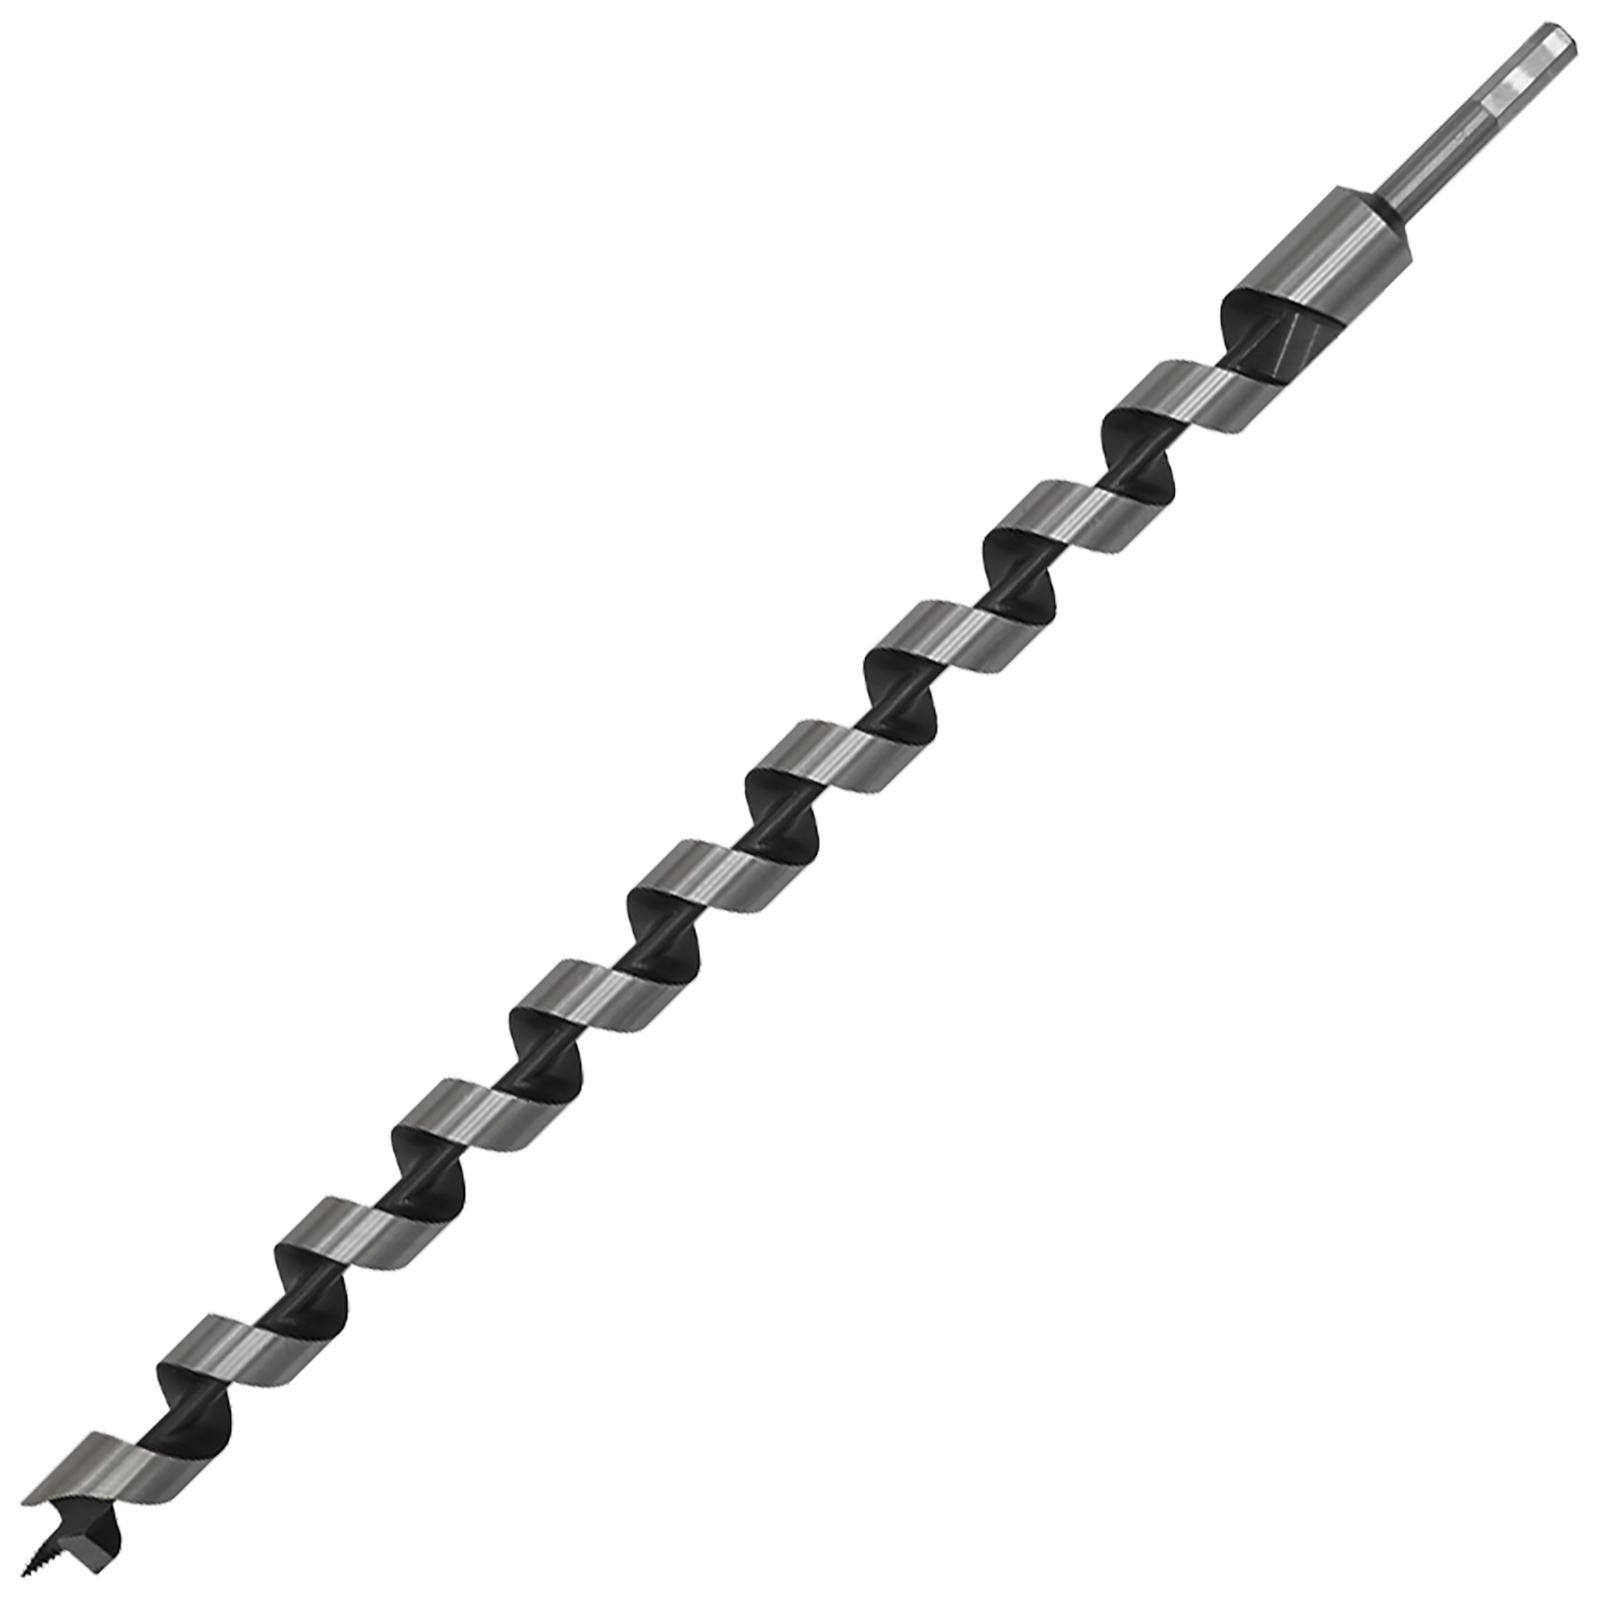 Worksafe by Sealey Auger Wood Drill Bit 28mm x 600mm